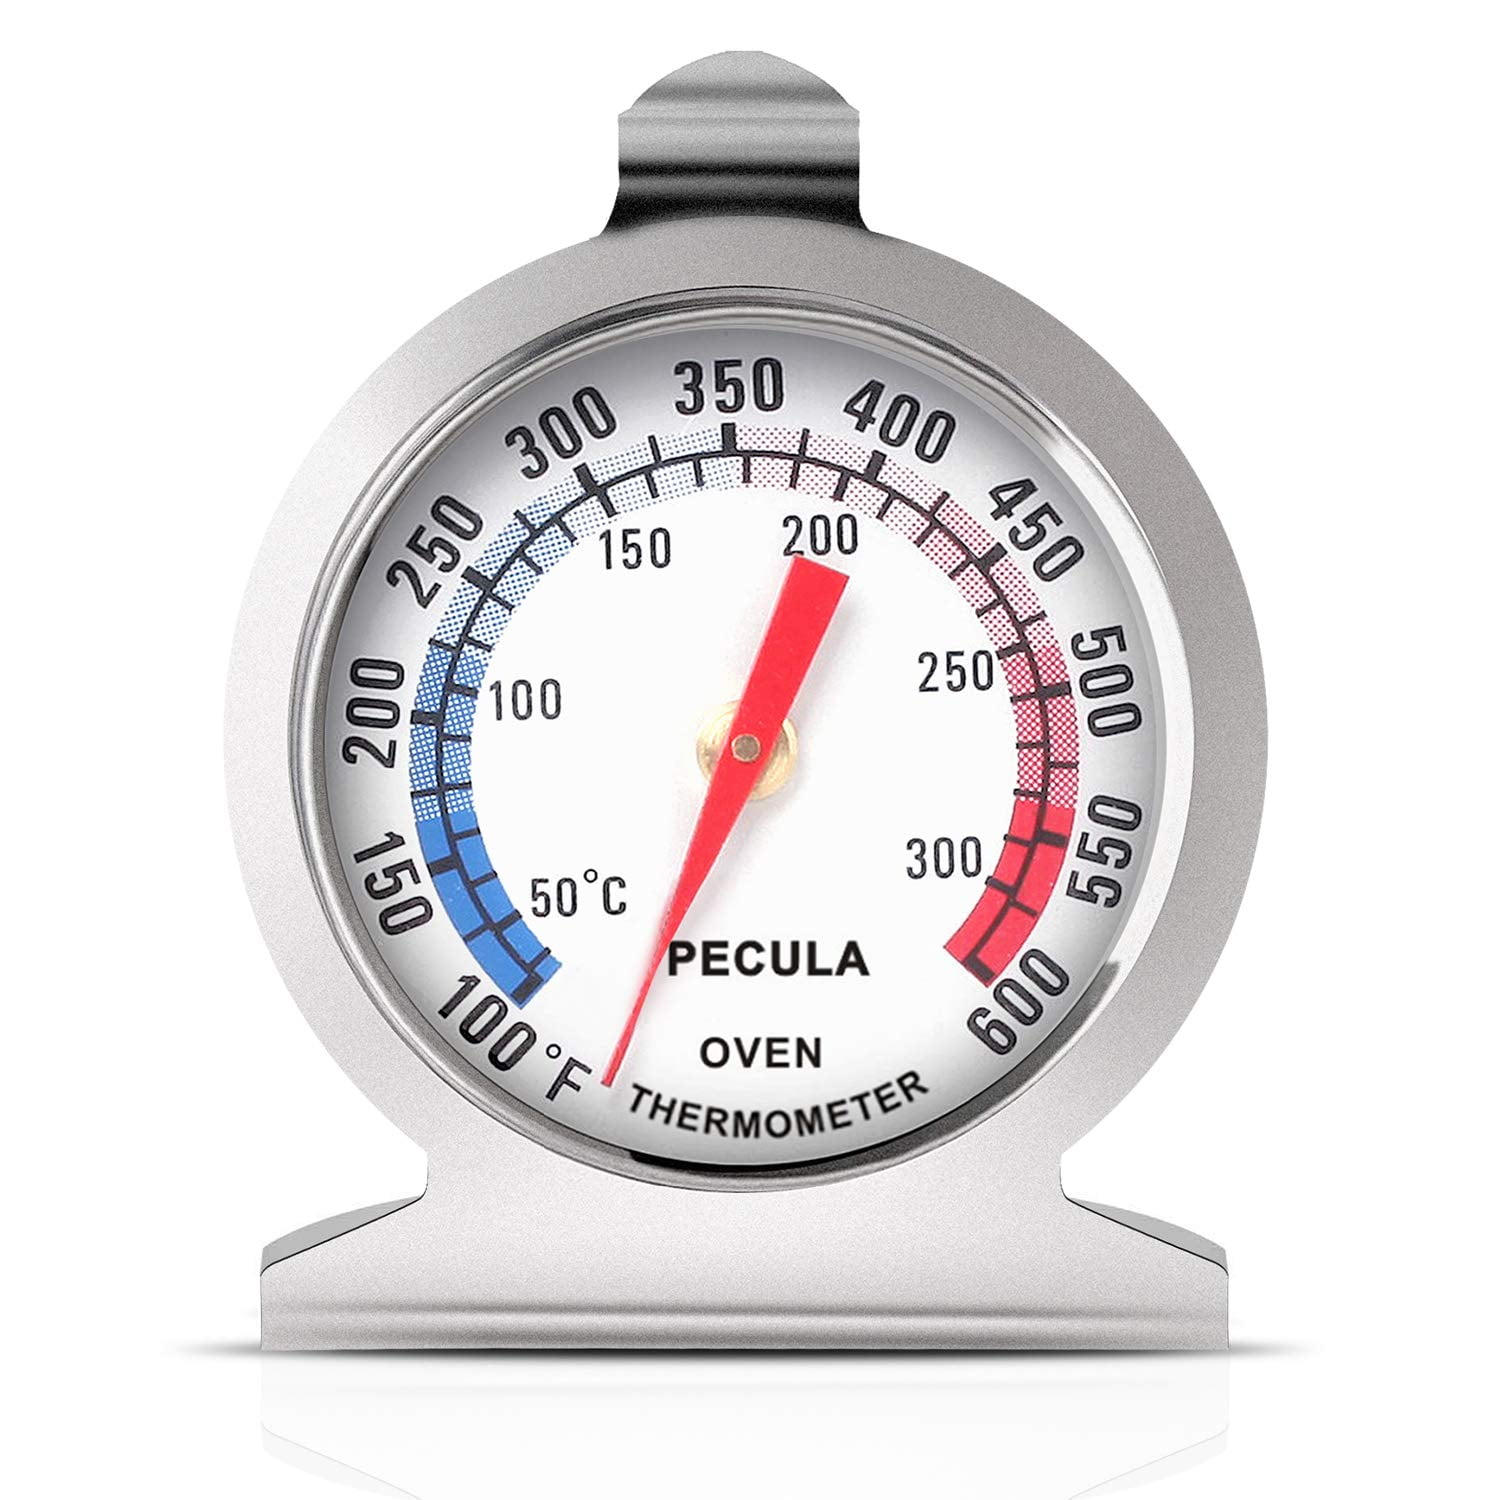 10 Reasons An Oven Thermometer Is As Important As An Oven For Your